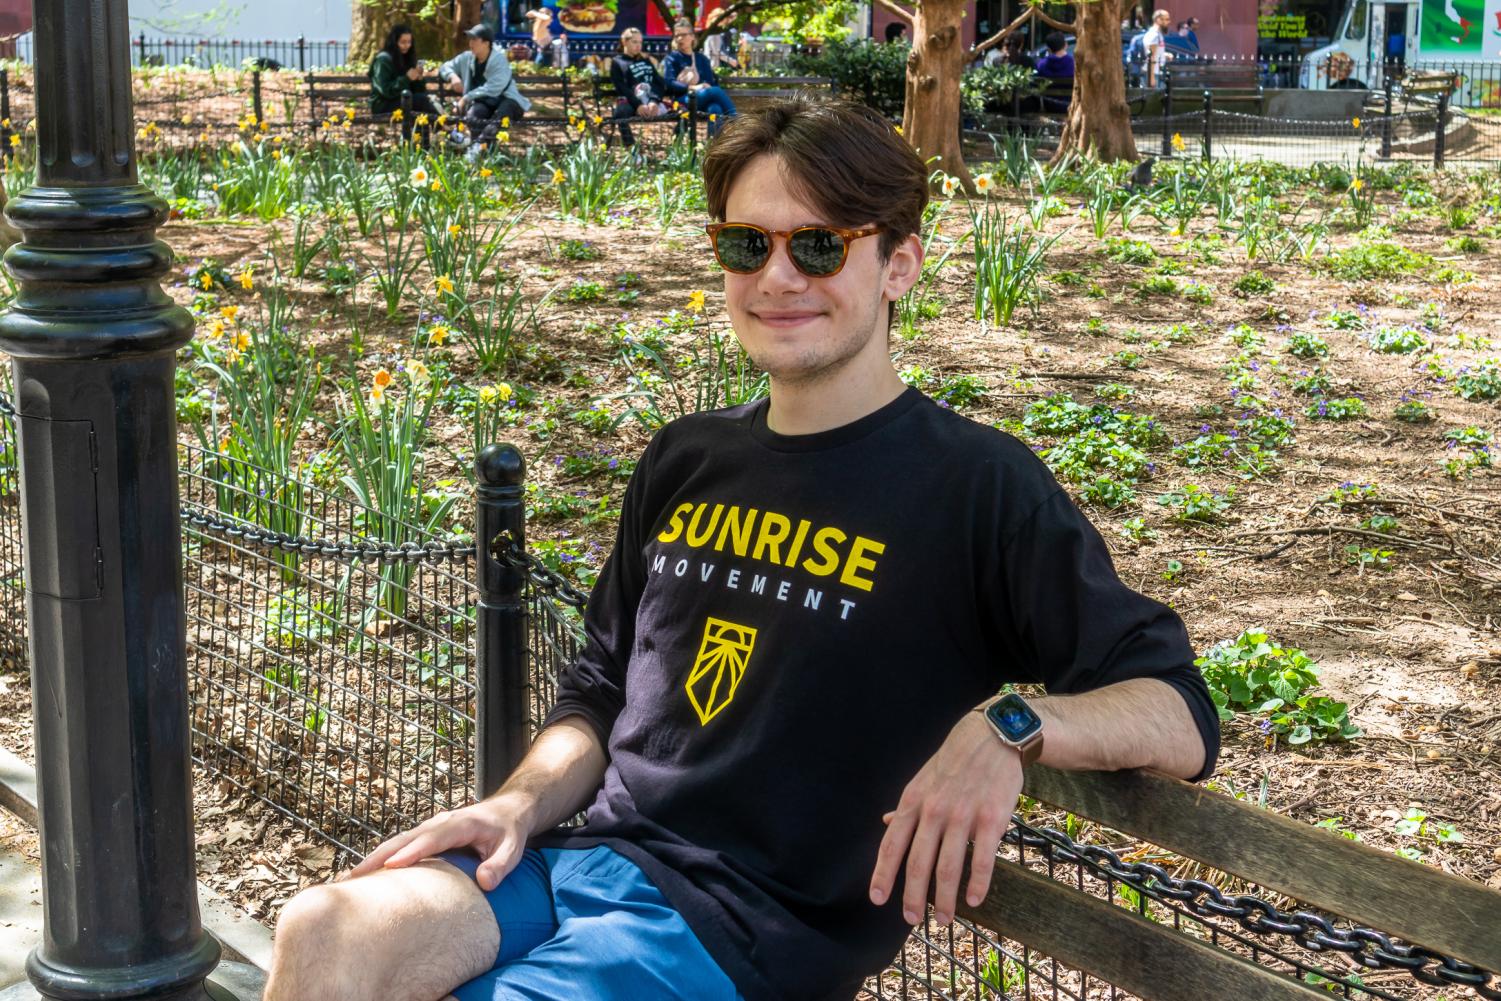 Dylan Wahbe, the hub coordinator for Sunrise NYU, sitting on a bench with a “Sunrise Movement” tee shirt